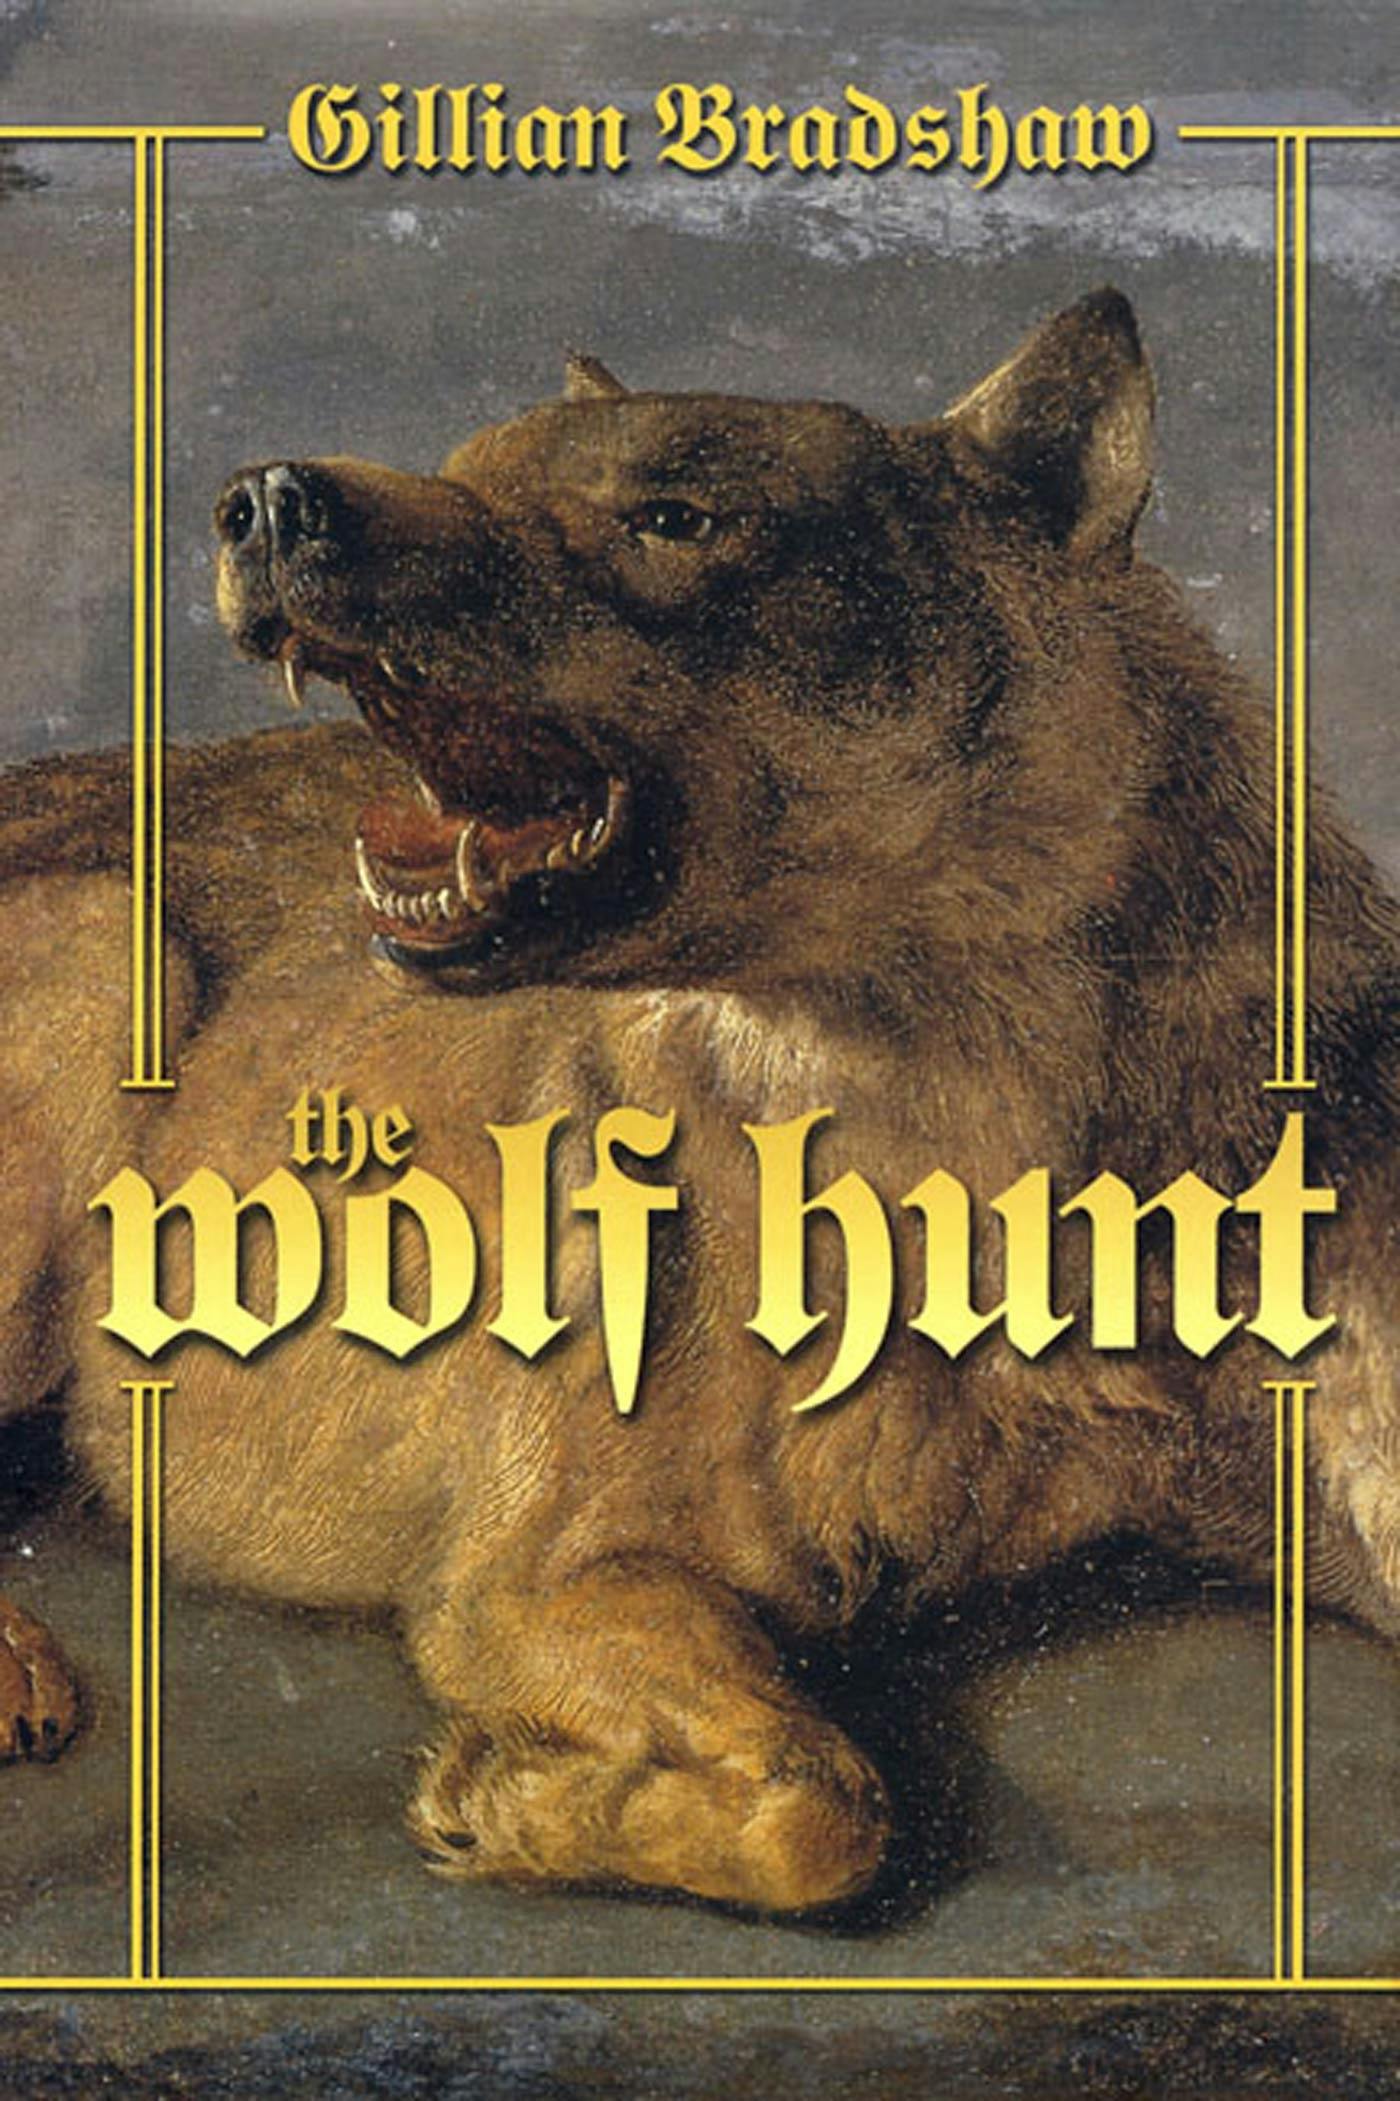 Cover for the book titled as: The Wolf Hunt